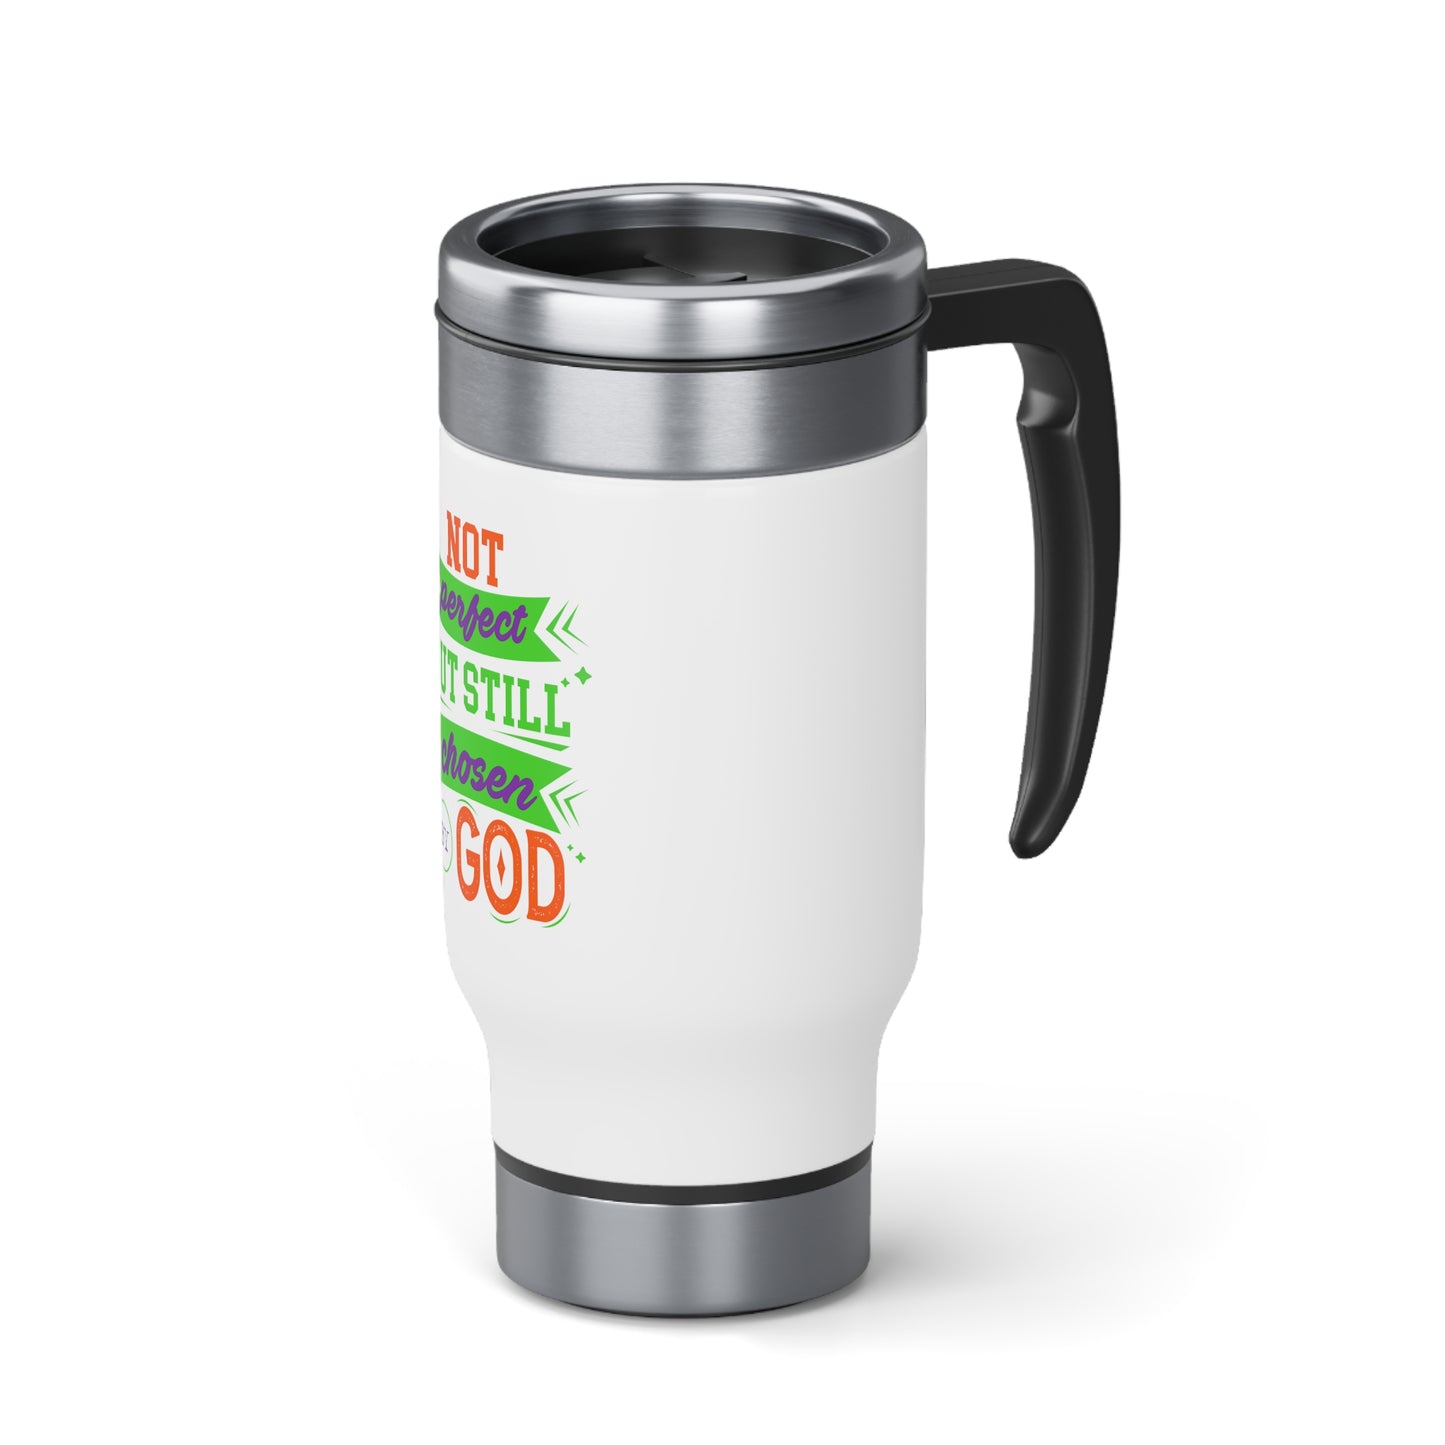 Not Perfect But Still Chosen By God (2) Travel Mug with Handle, 14oz